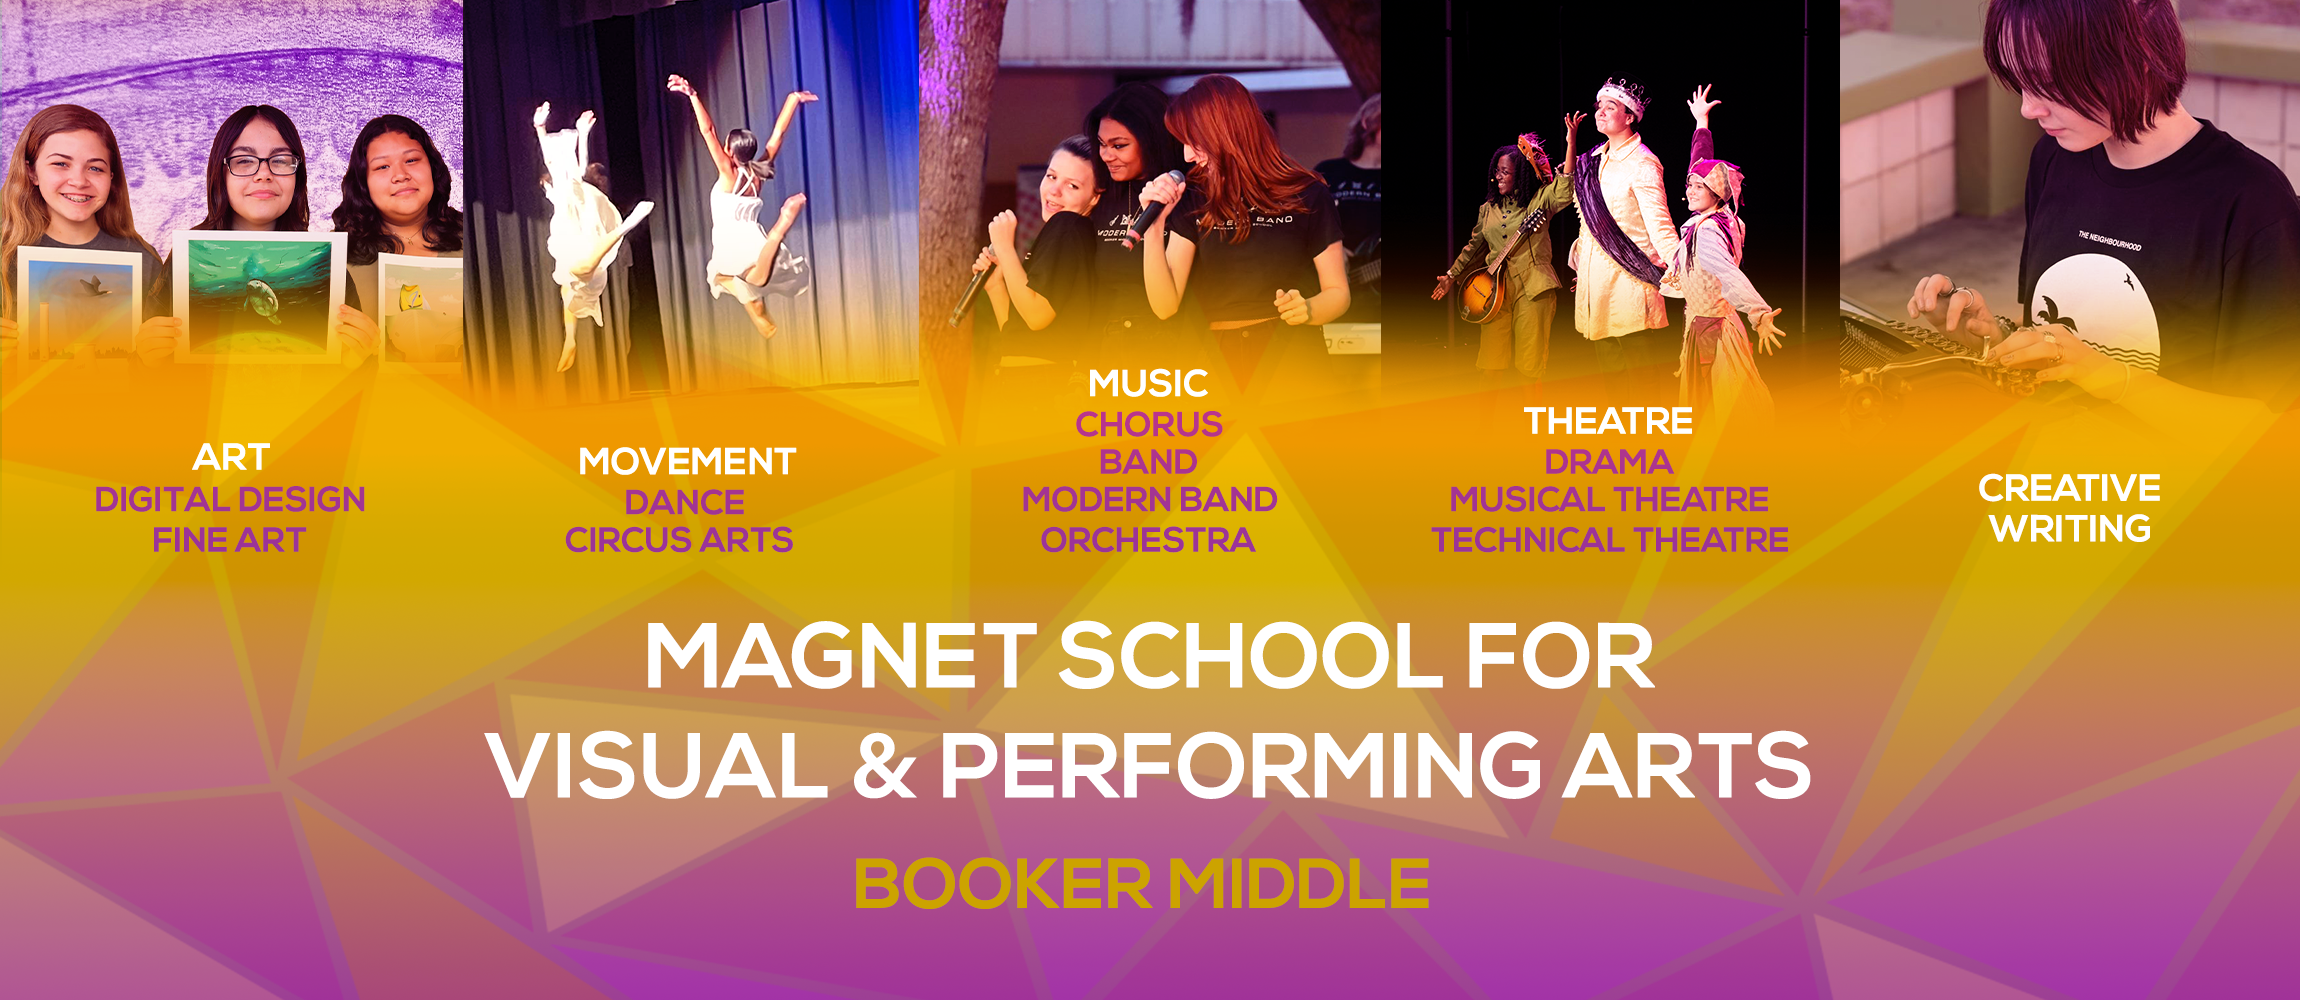 banner of performing arts programs Booker Middle offers, art, digital design fine art, movement dance circus arts, music chorus band modern band orchestra, theatre drama musical theatre technical theatre, creative writing